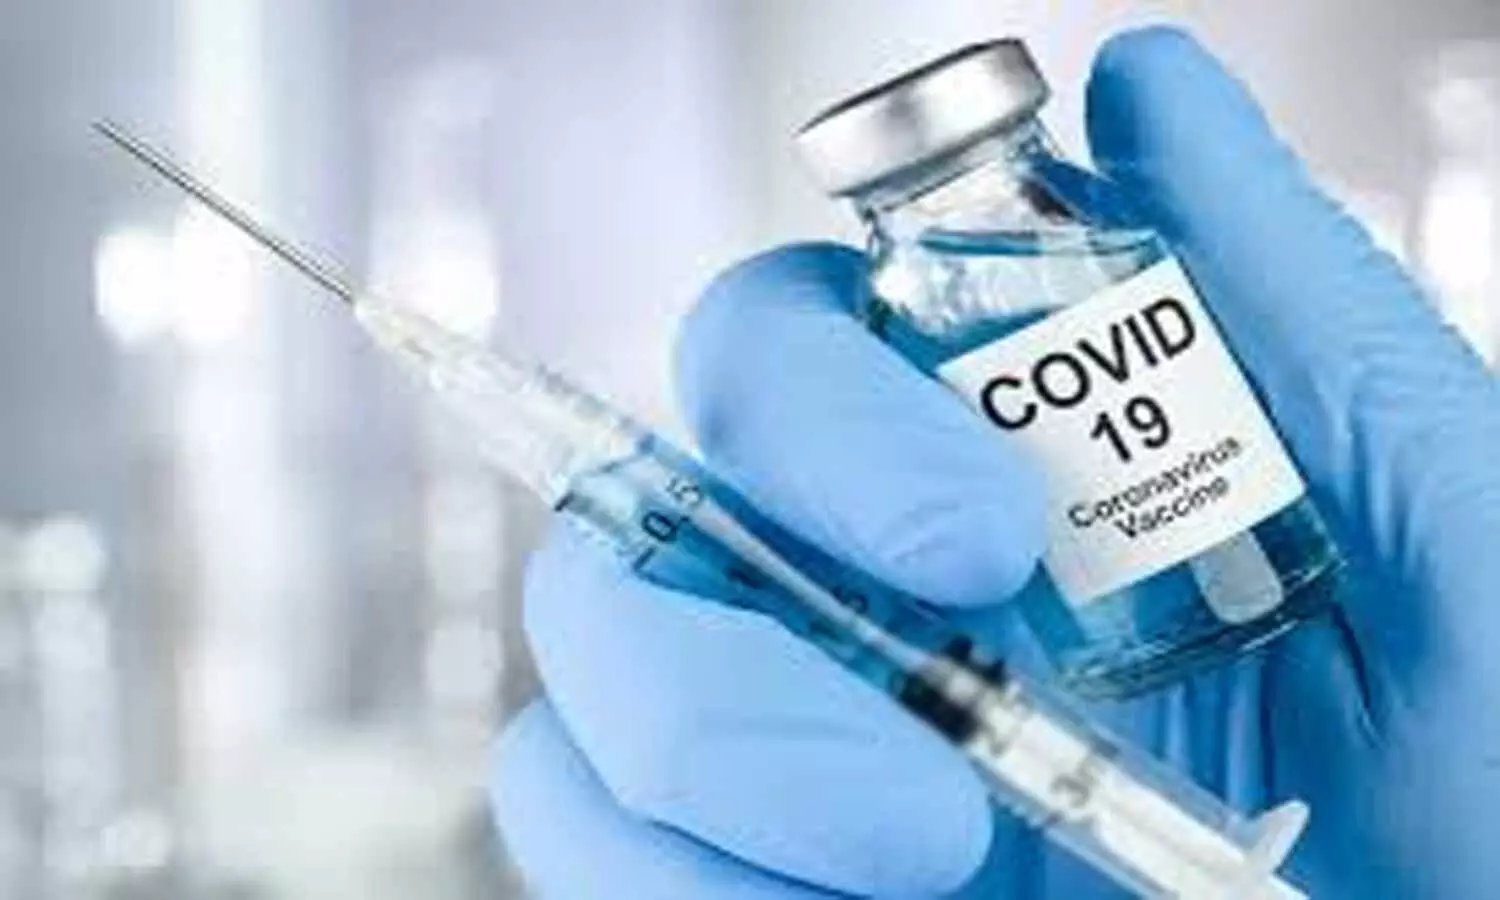 COVID-19 vaccine found to be 90% effective: Pfizer